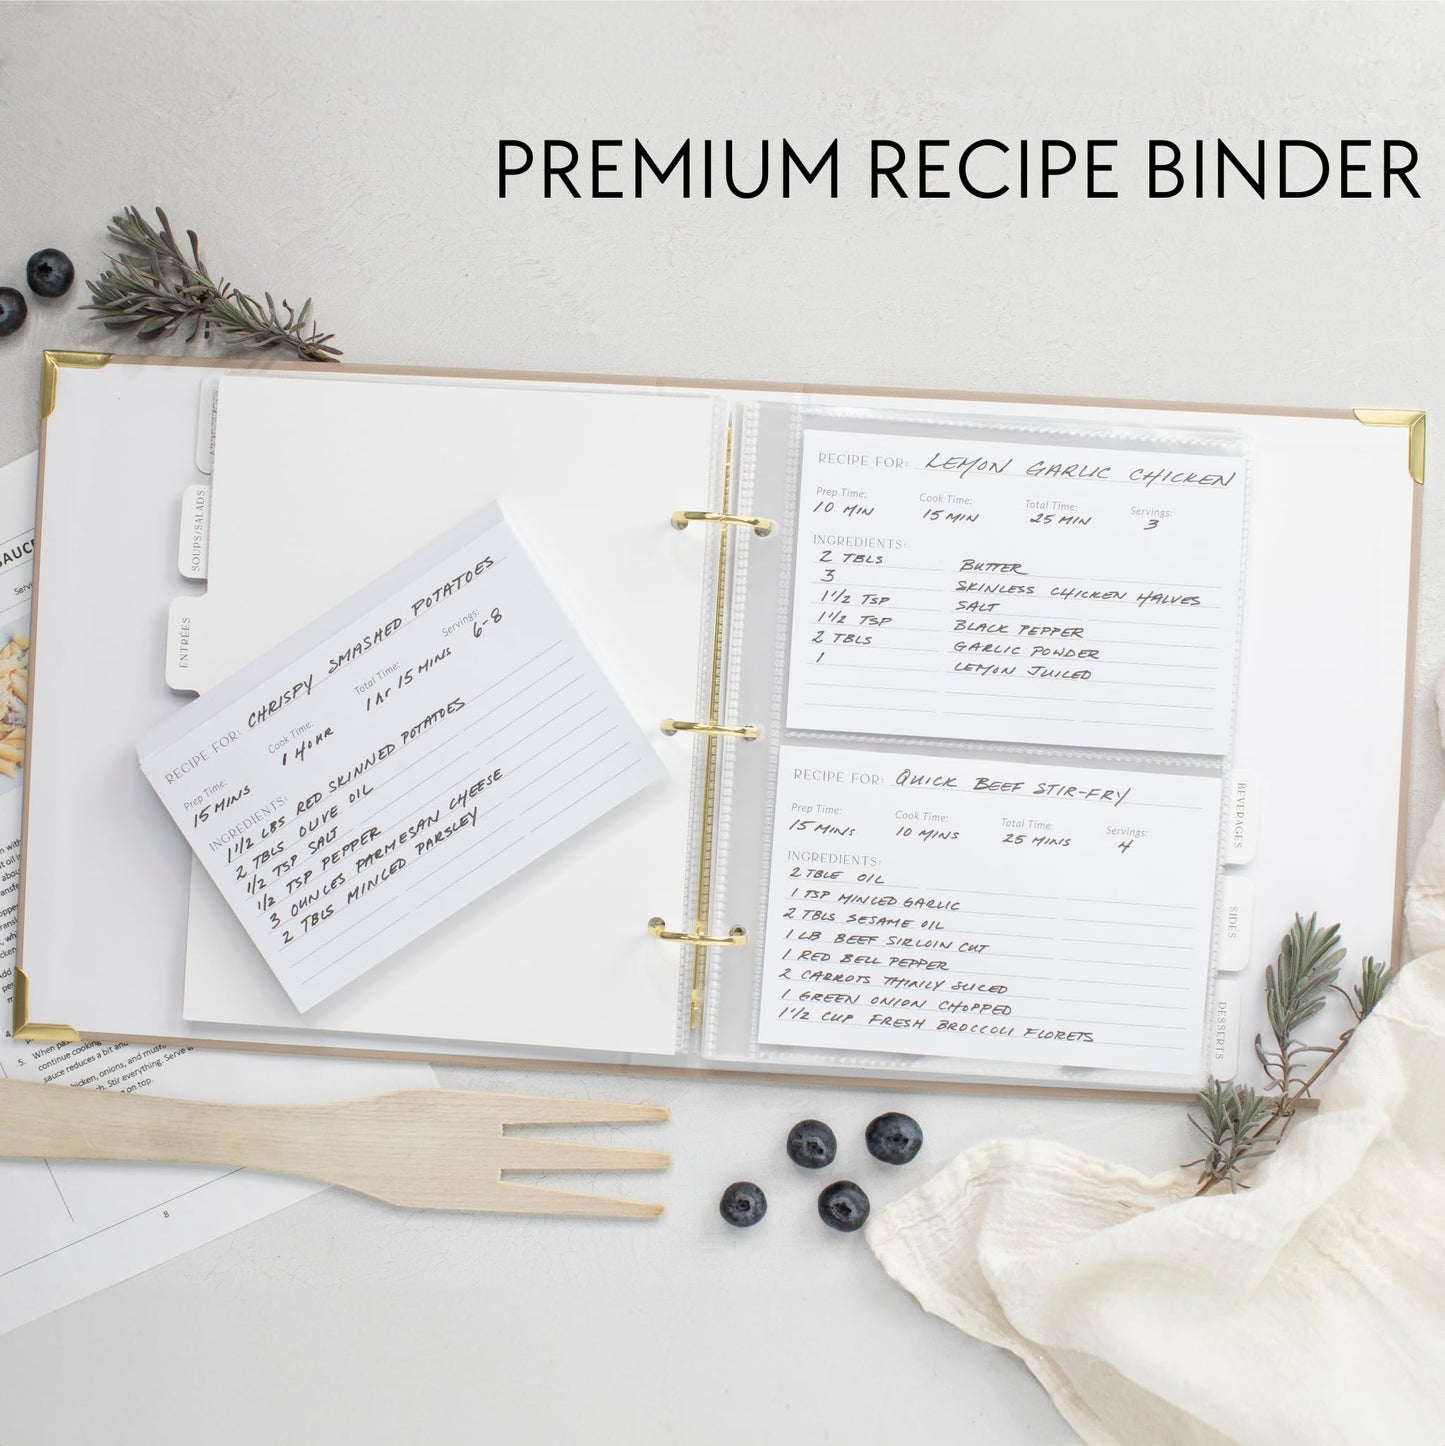 Aesthetic Recipe Binder with Waterproof Cover - The Perfect Recipe Book with Plastic Sleeves to Write in Your Own Recipes - Quality Blank Cookbook Binder to Organize Your Recipes - Recipe Cards incl.